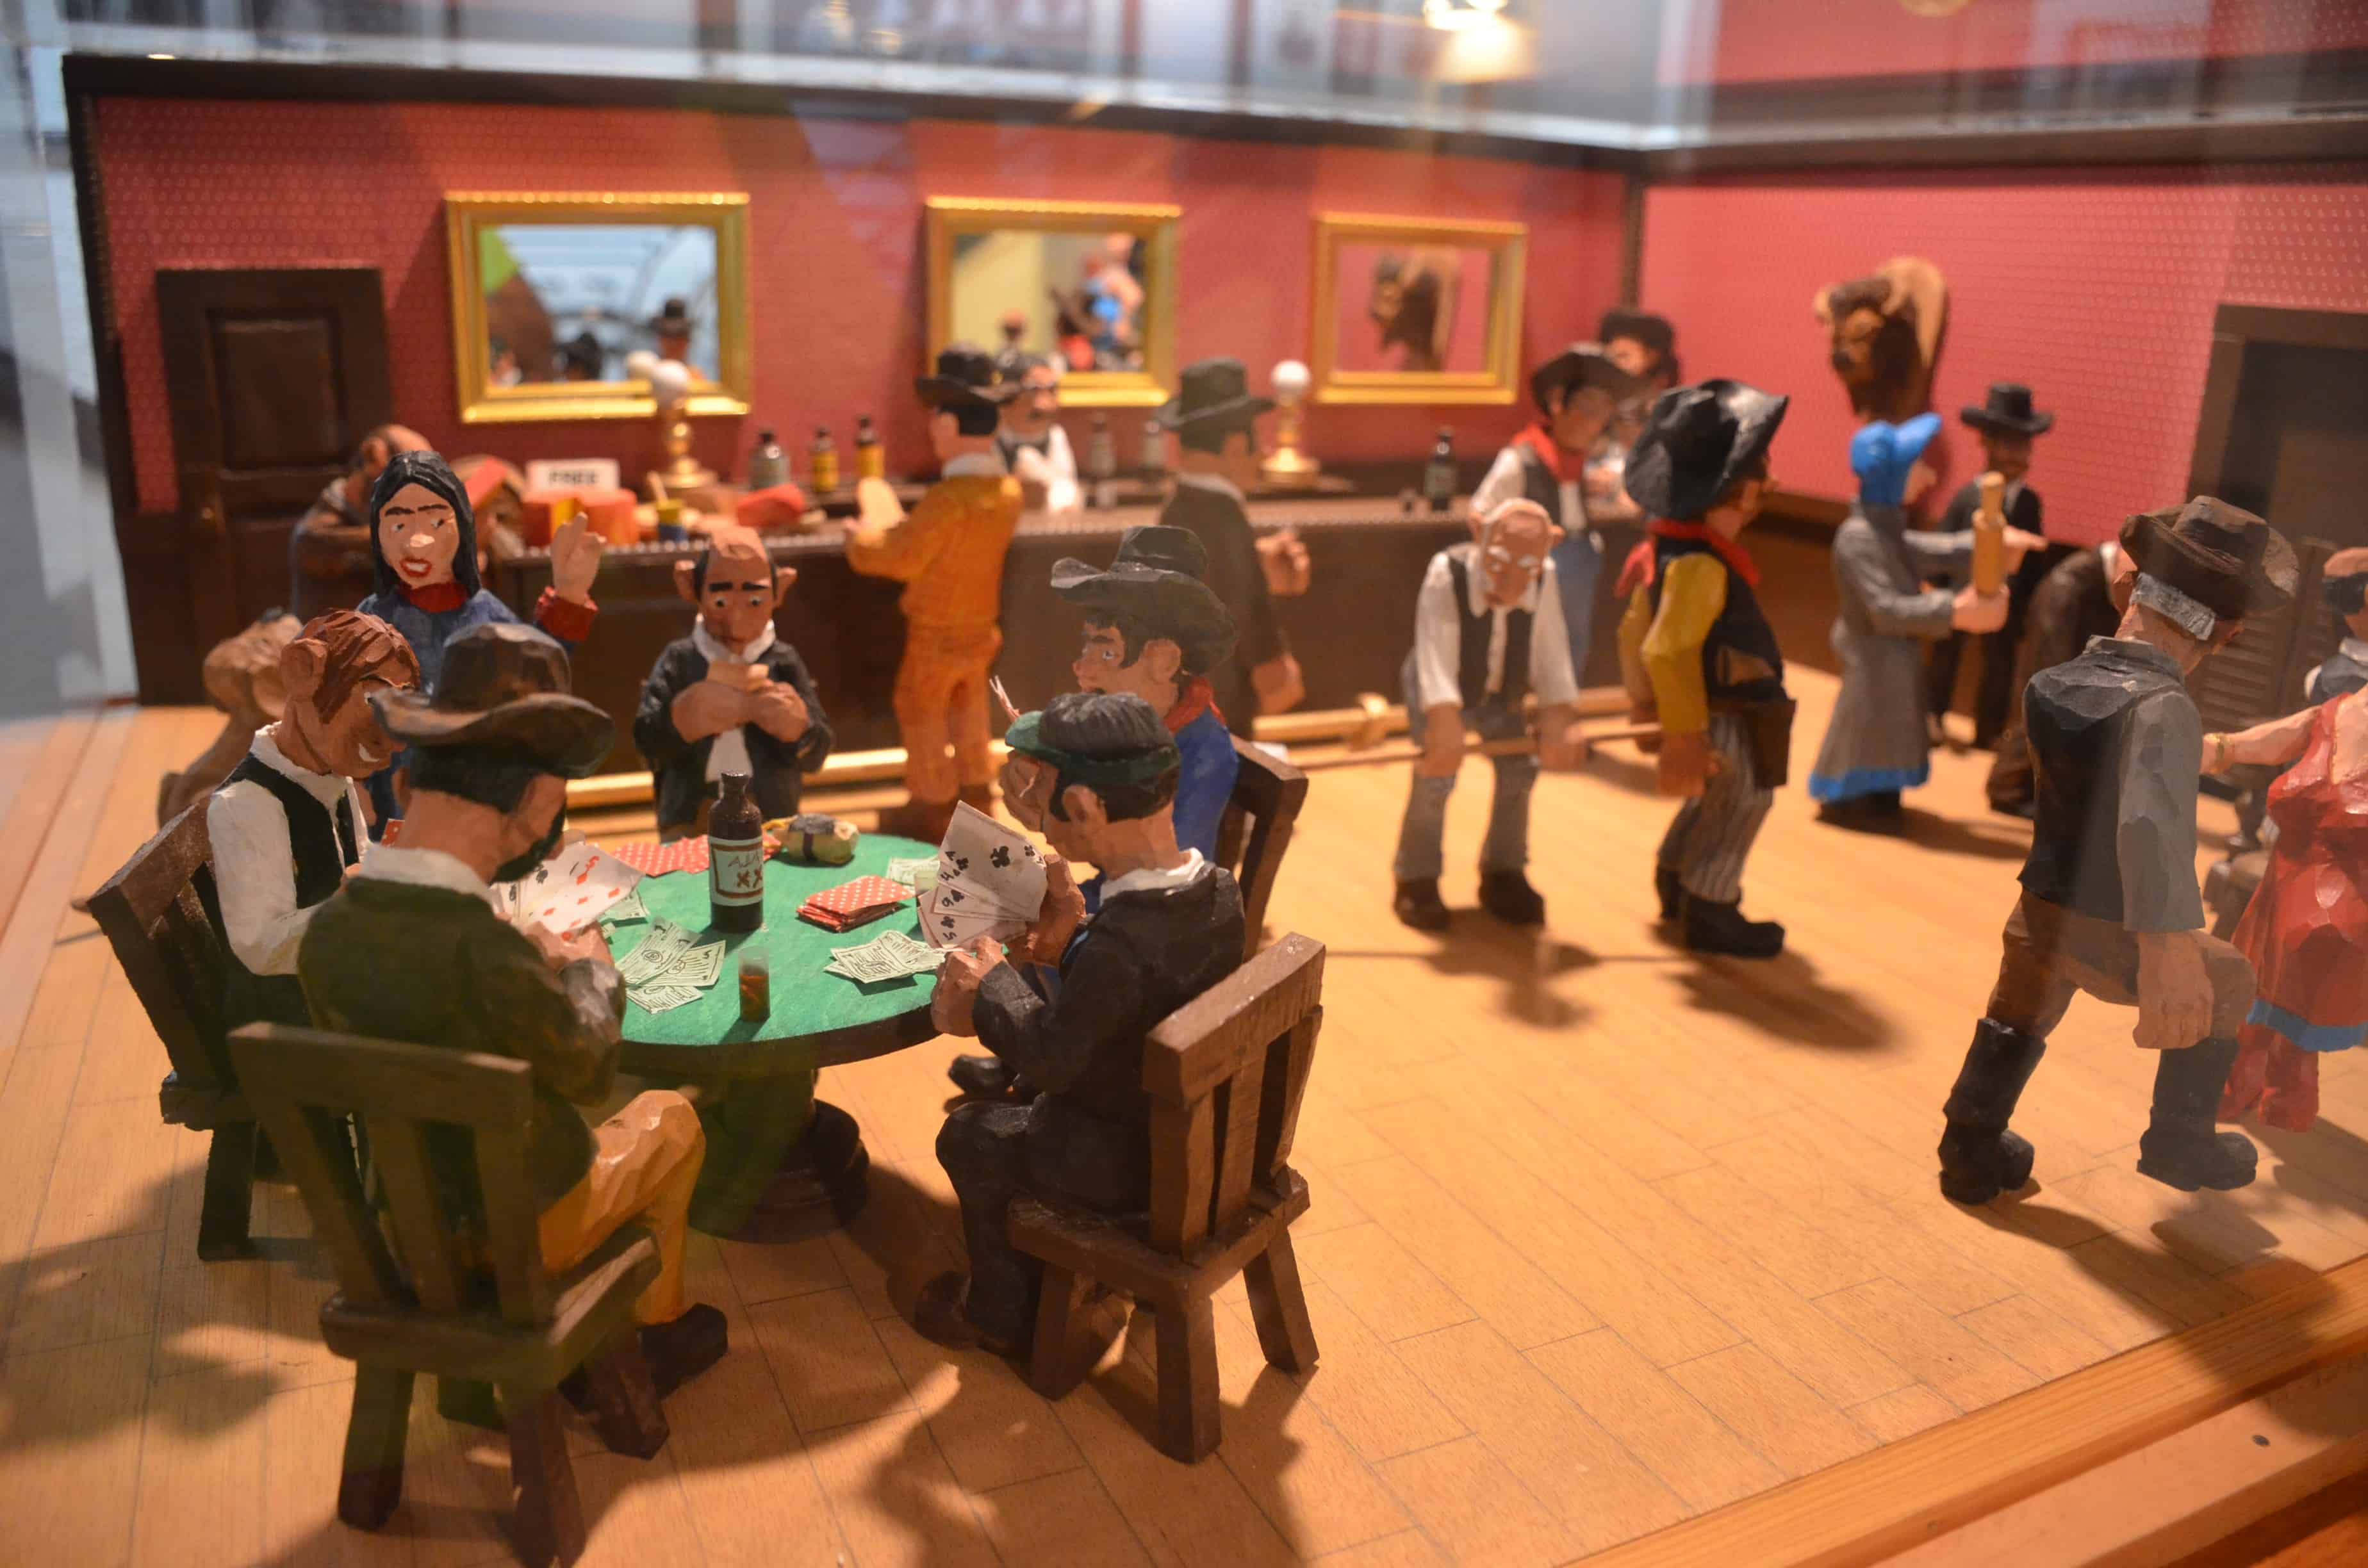 Gambling saloon scene at the Nelson Museum of the West in Cheyenne, Wyoming